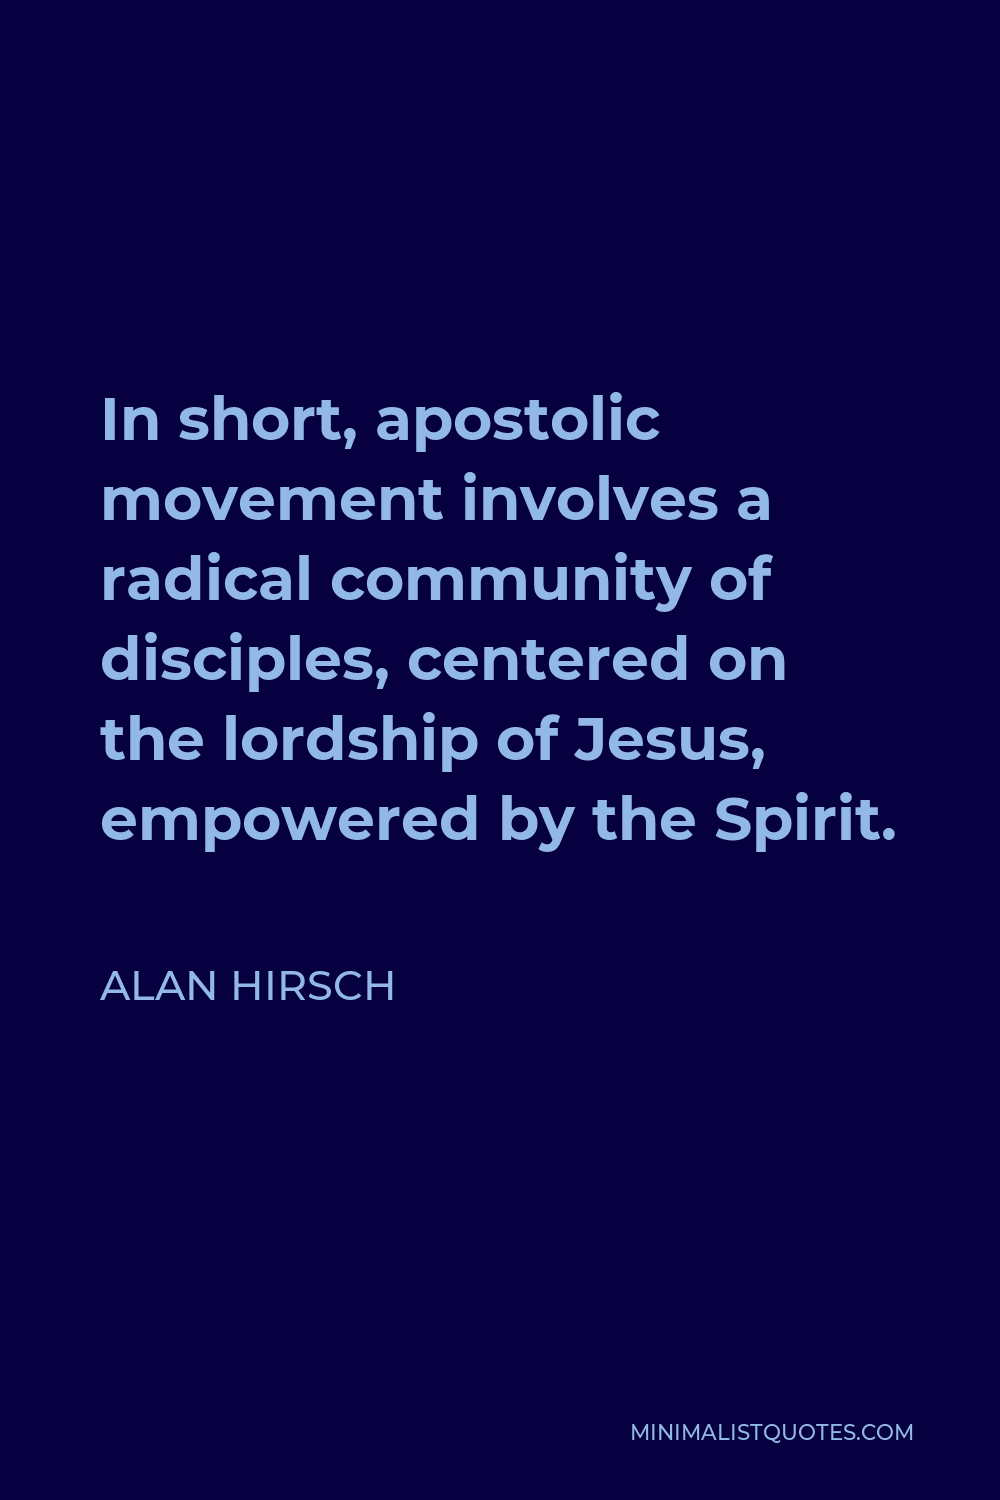 Alan Hirsch Quote - In short, apostolic movement involves a radical community of disciples, centered on the lordship of Jesus, empowered by the Spirit.